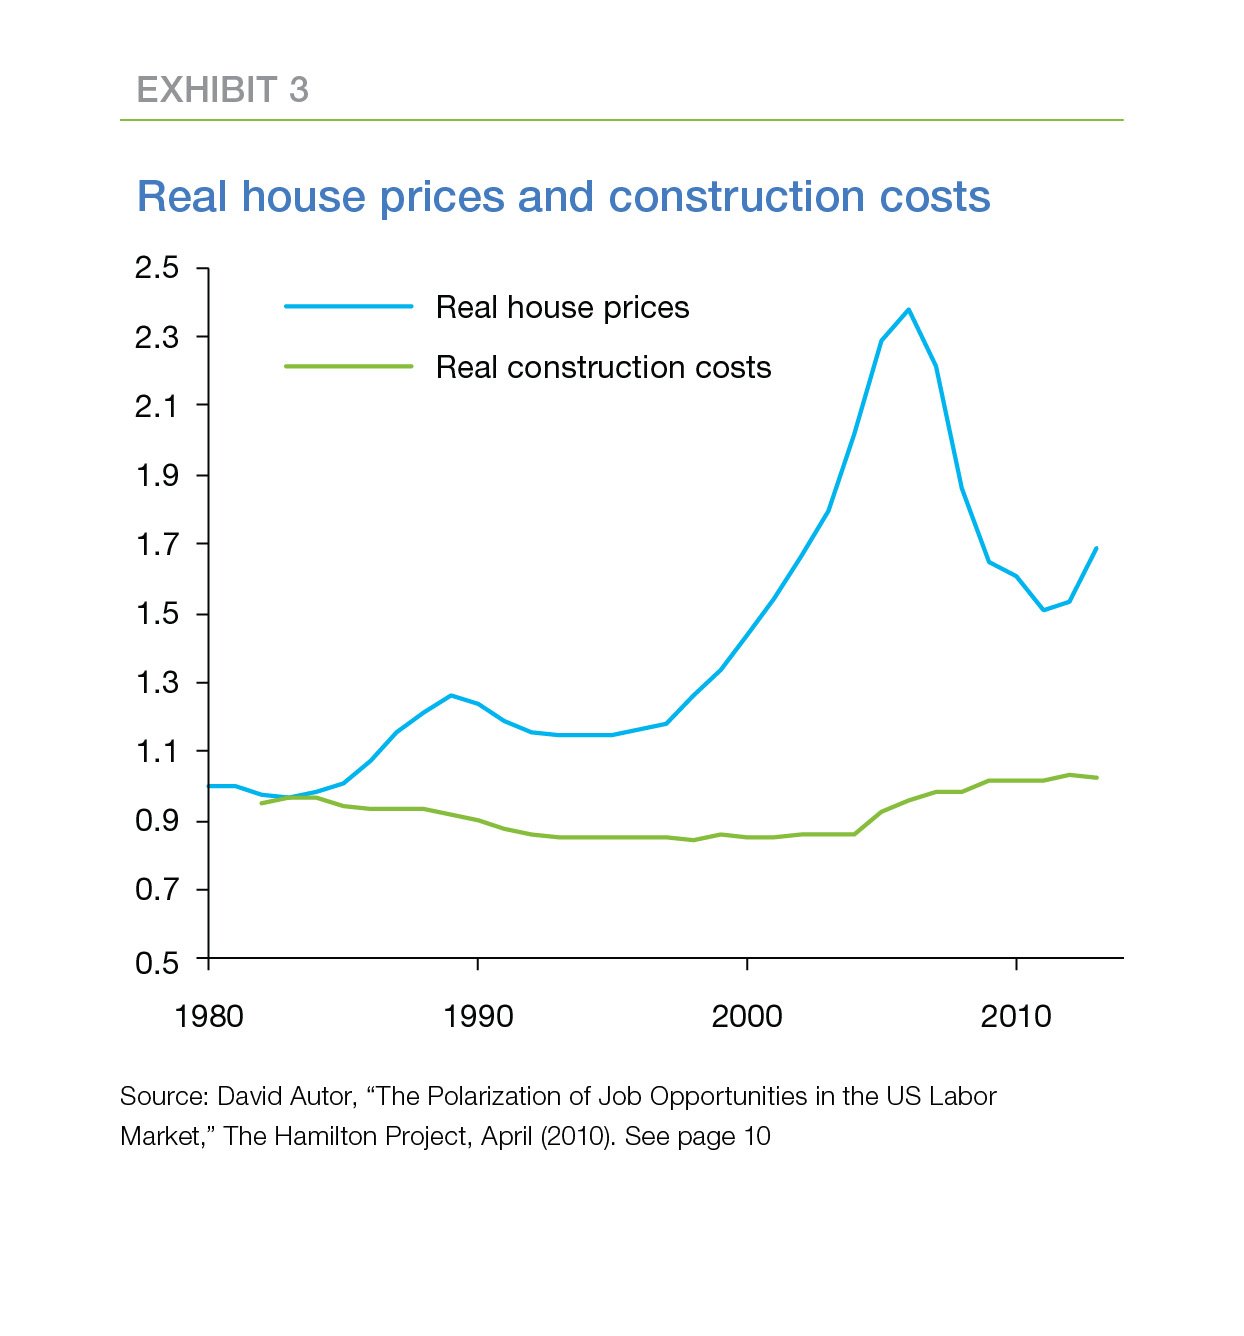 Line graph showing real house prices and construction costs from 1980 to 2010